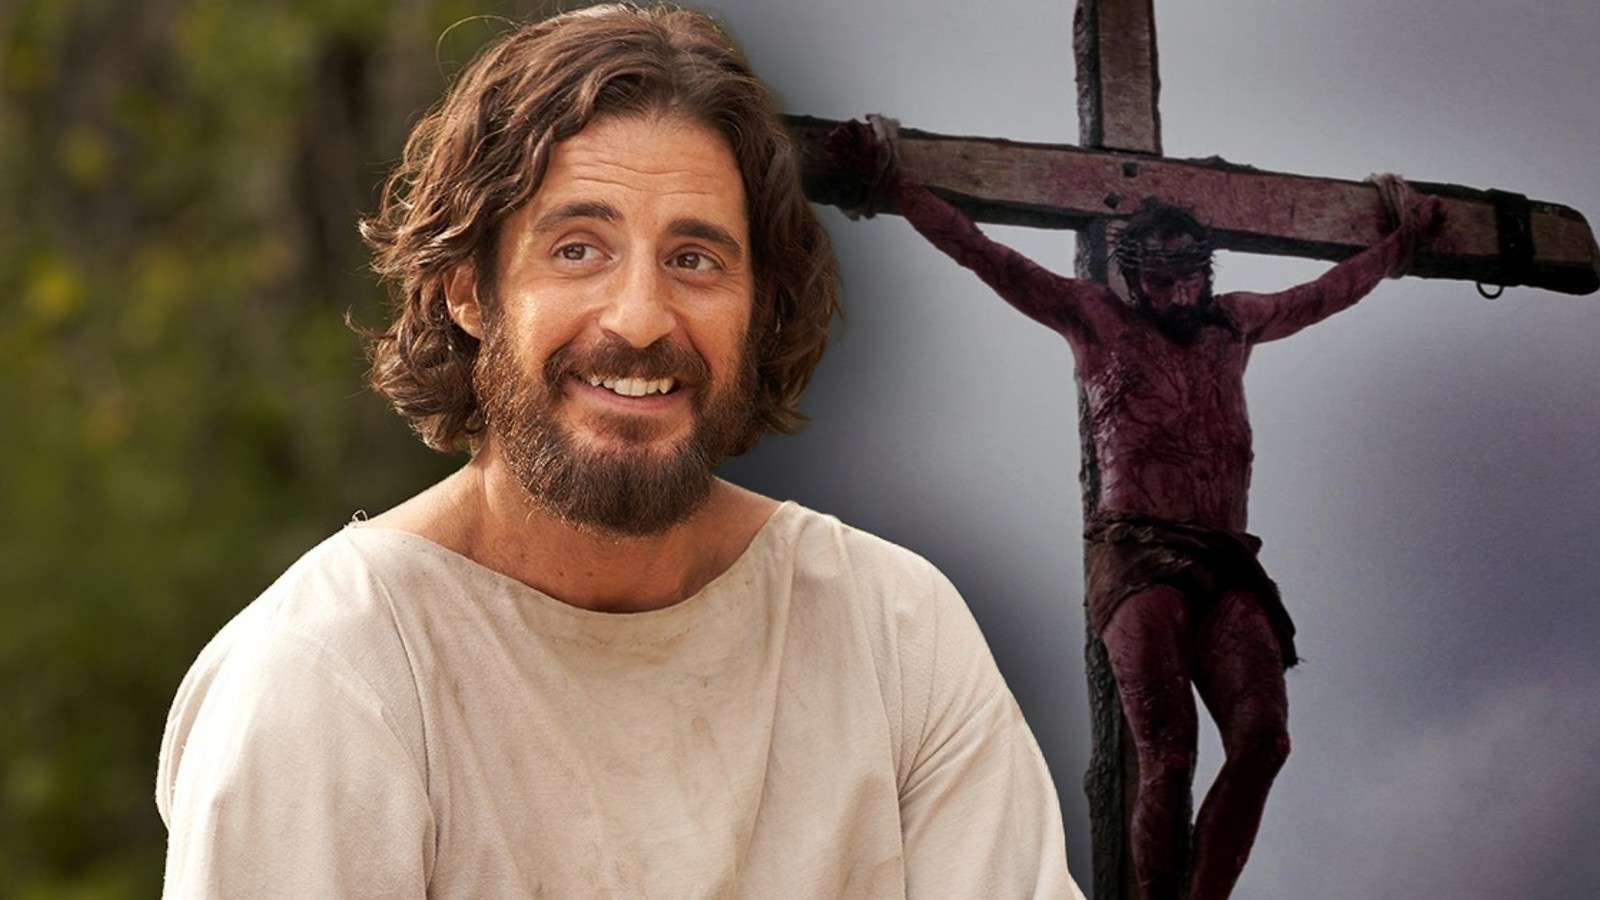 Jonathan Roumie as Jesus and the crucifixion scene from The Passion of the Christ